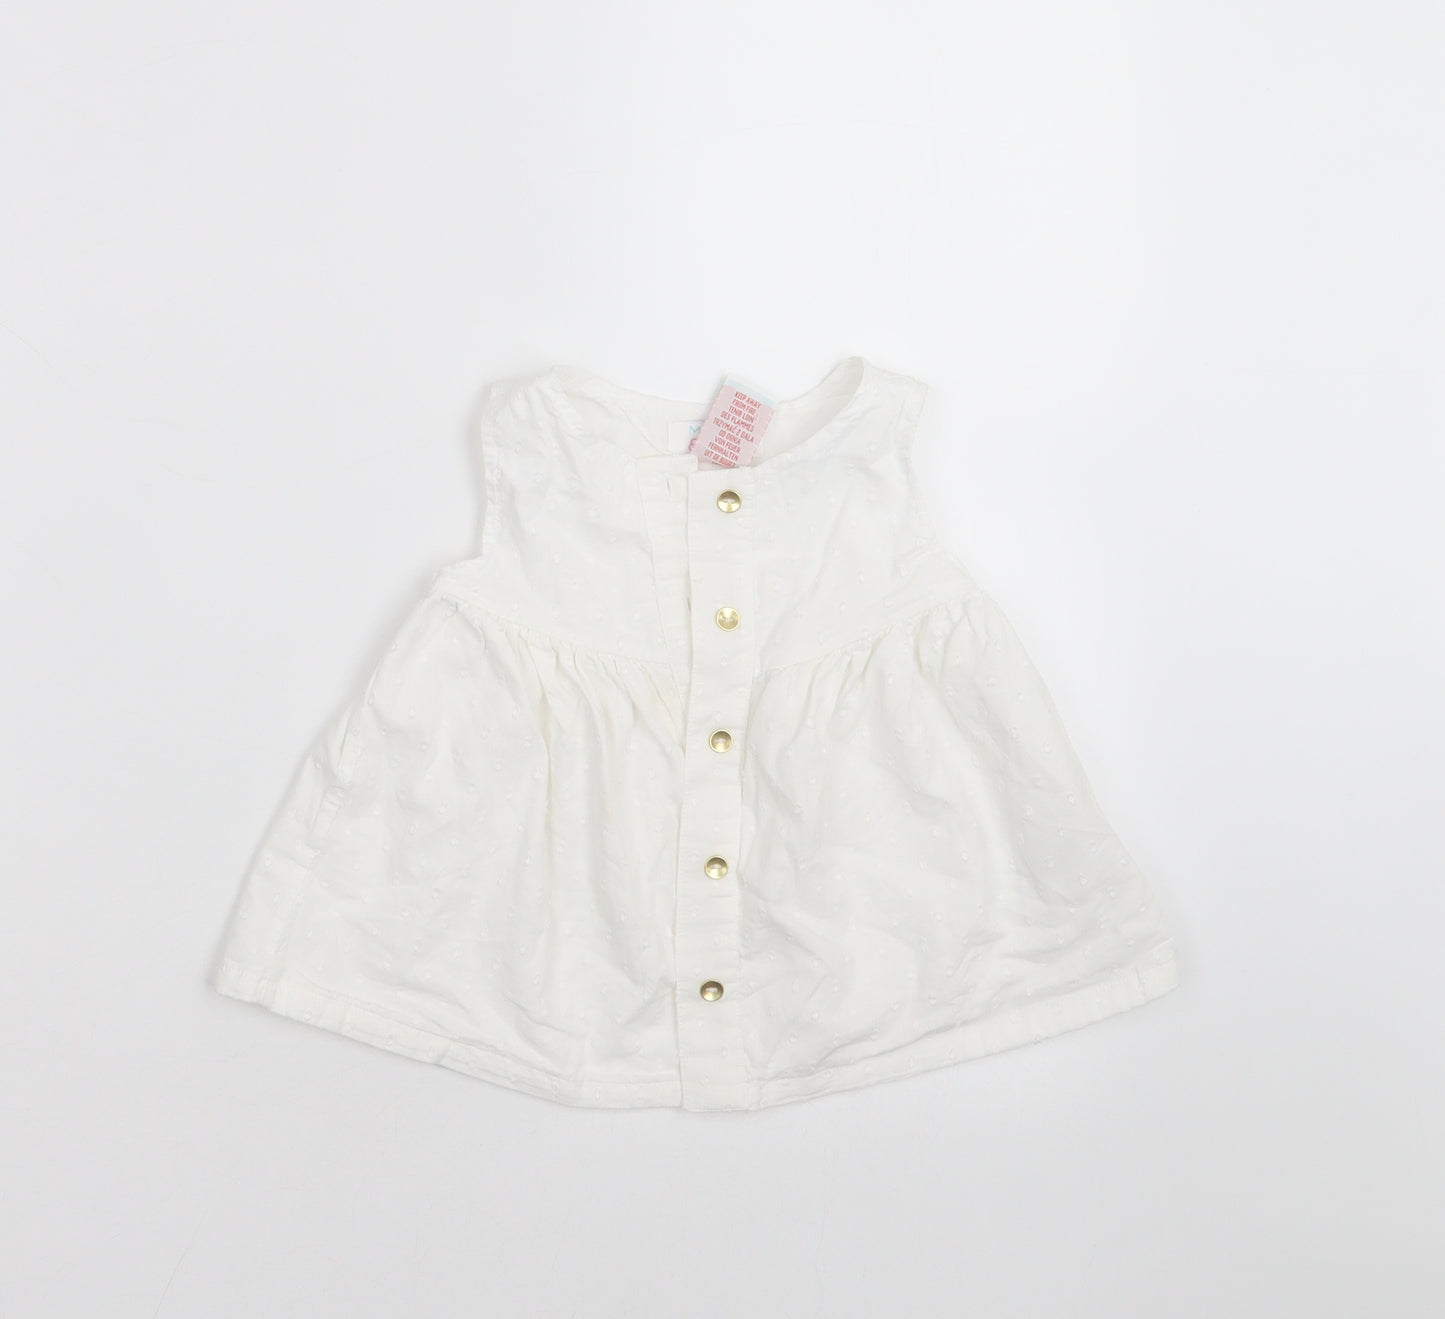 Maggie & Zoe Girls White   Basic Blouse Size 12-18 Months  - dotted pattern